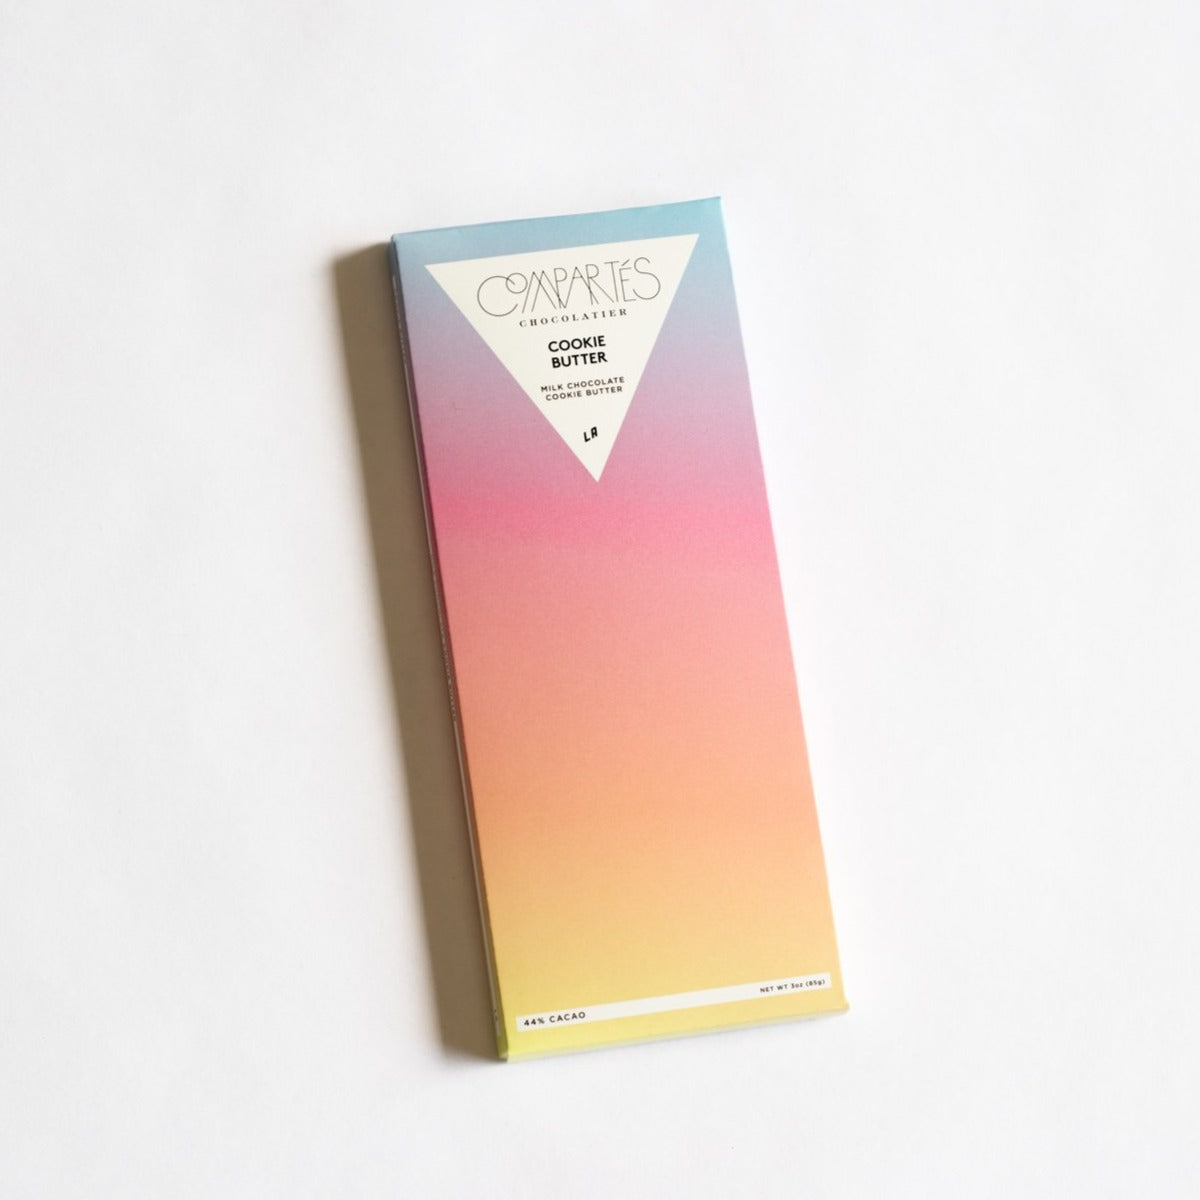 Cookie butter chocolate bar packaging that feature an ombre design that goes from blue to purple to pink to orange to yellow.